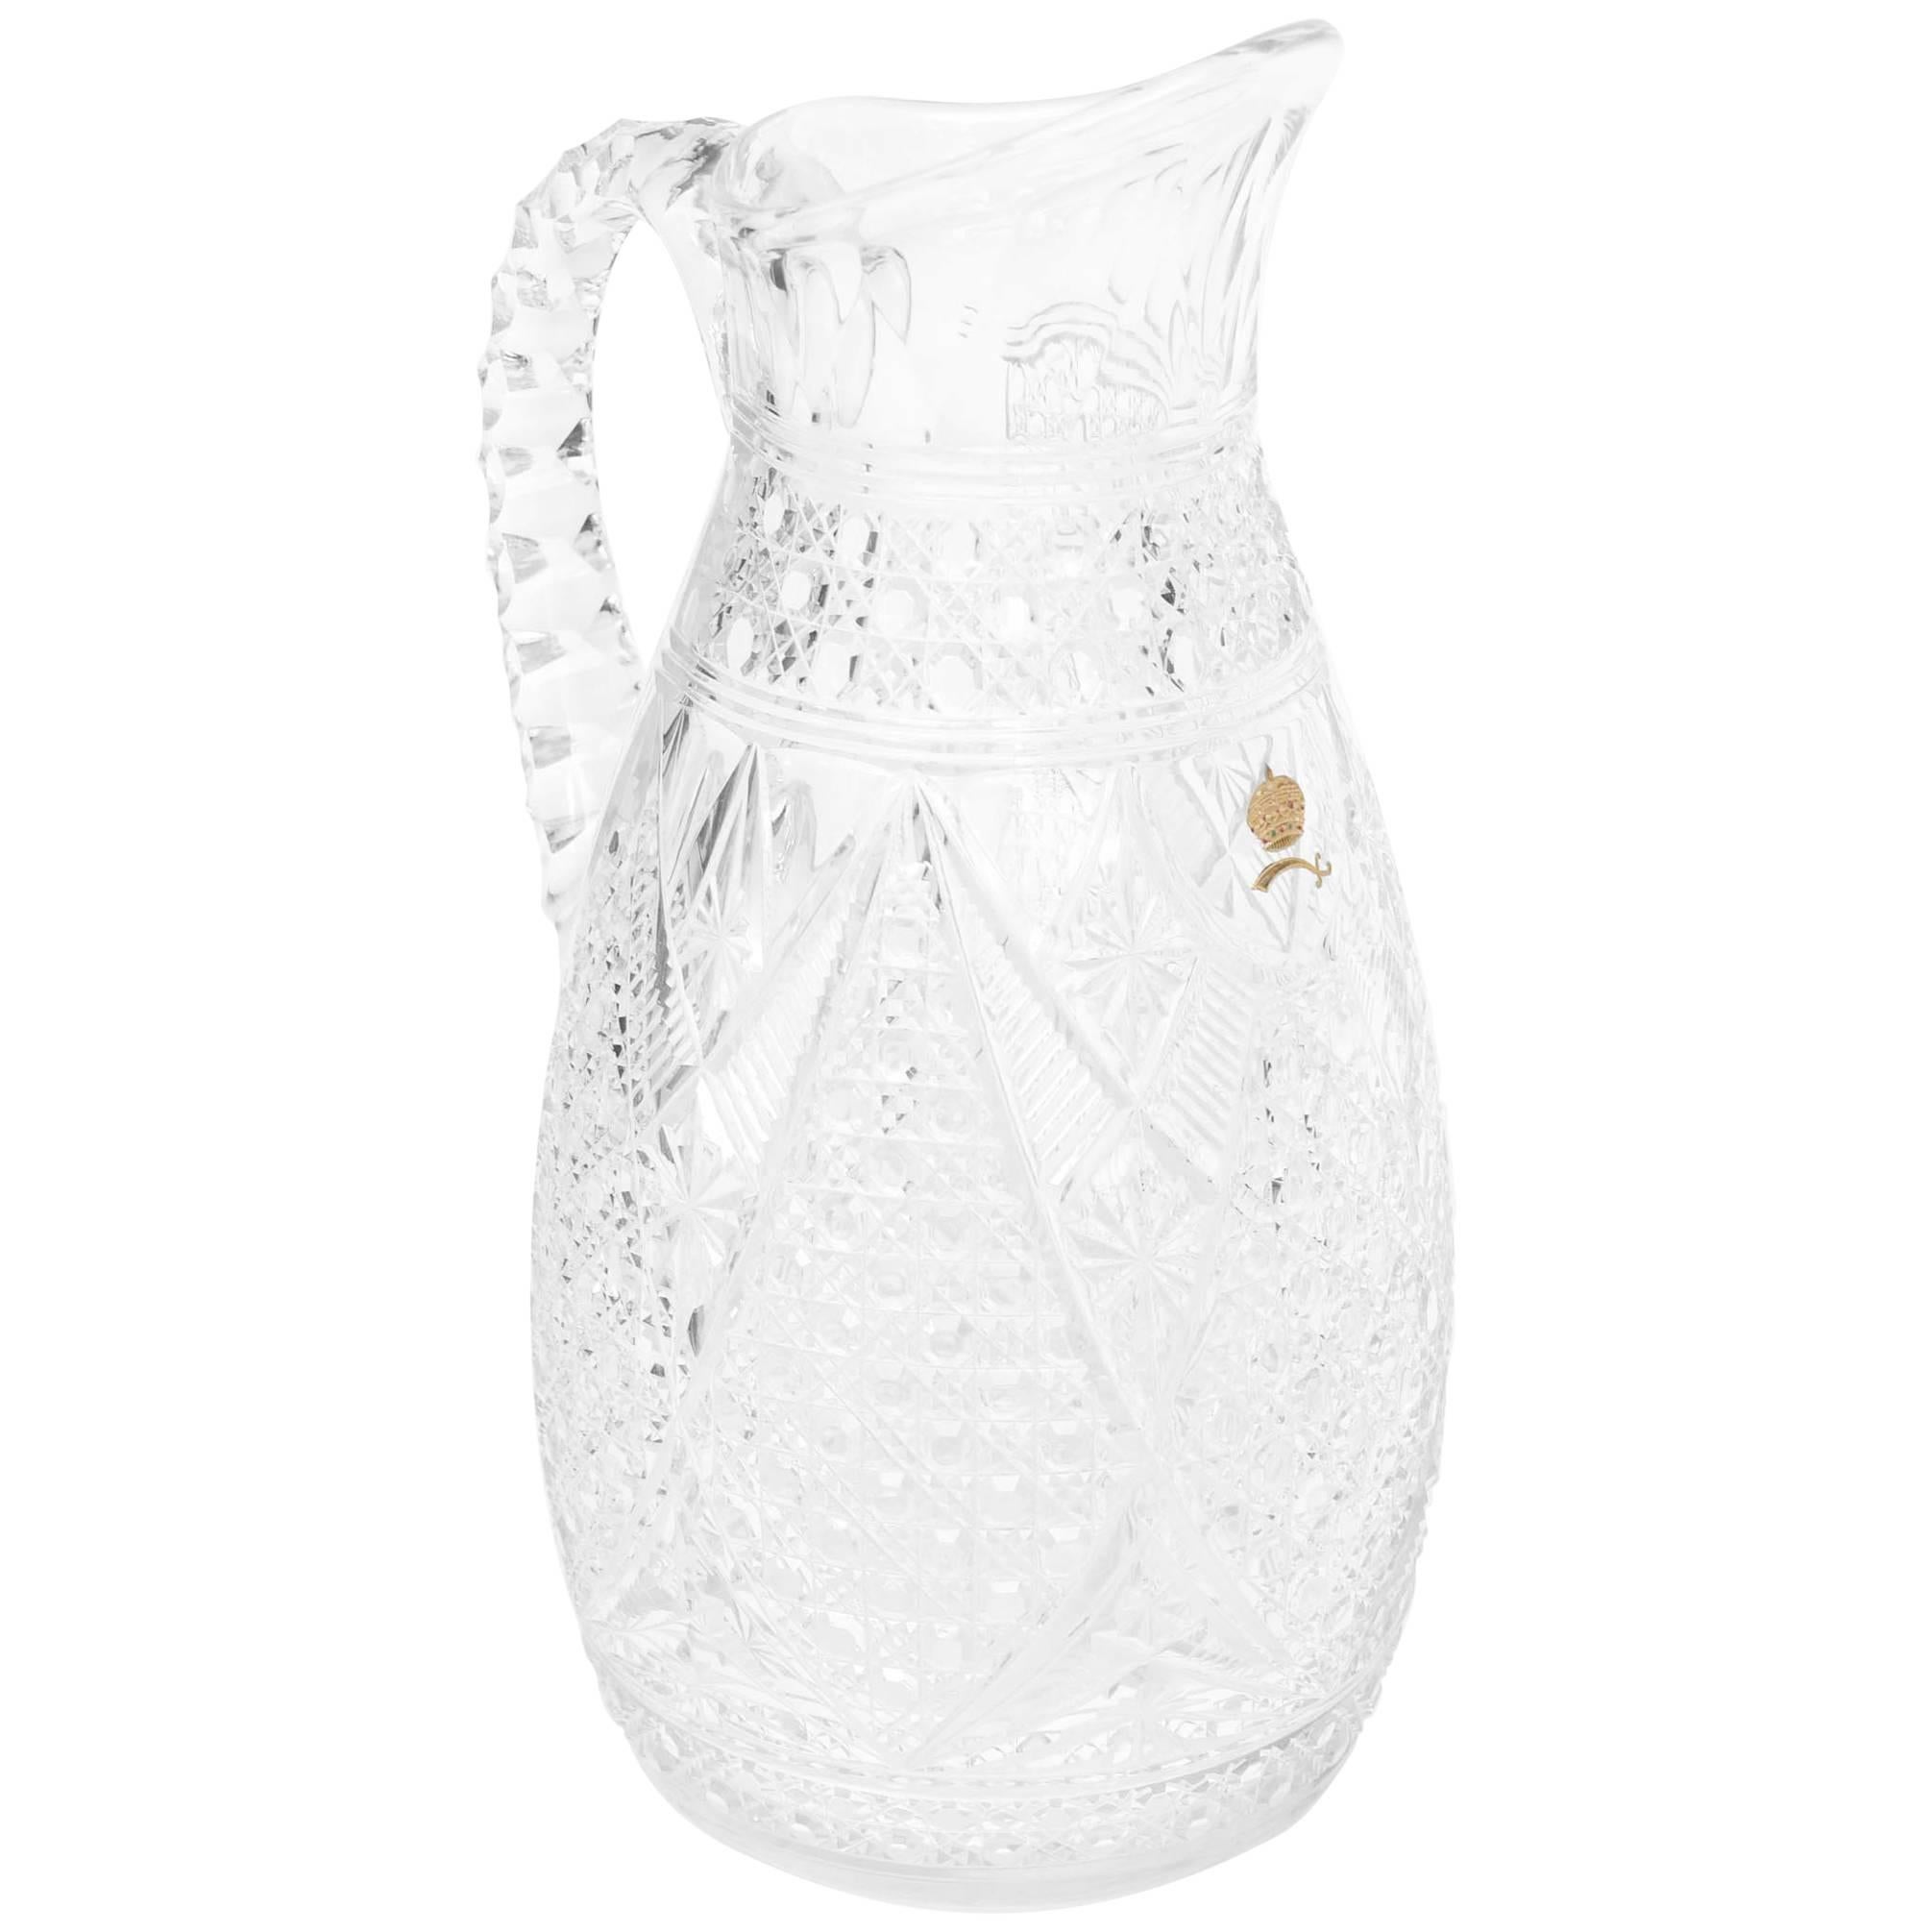 Baccarat "Sultan of Brunei" Water Pitcher, Heavy and Exquisite